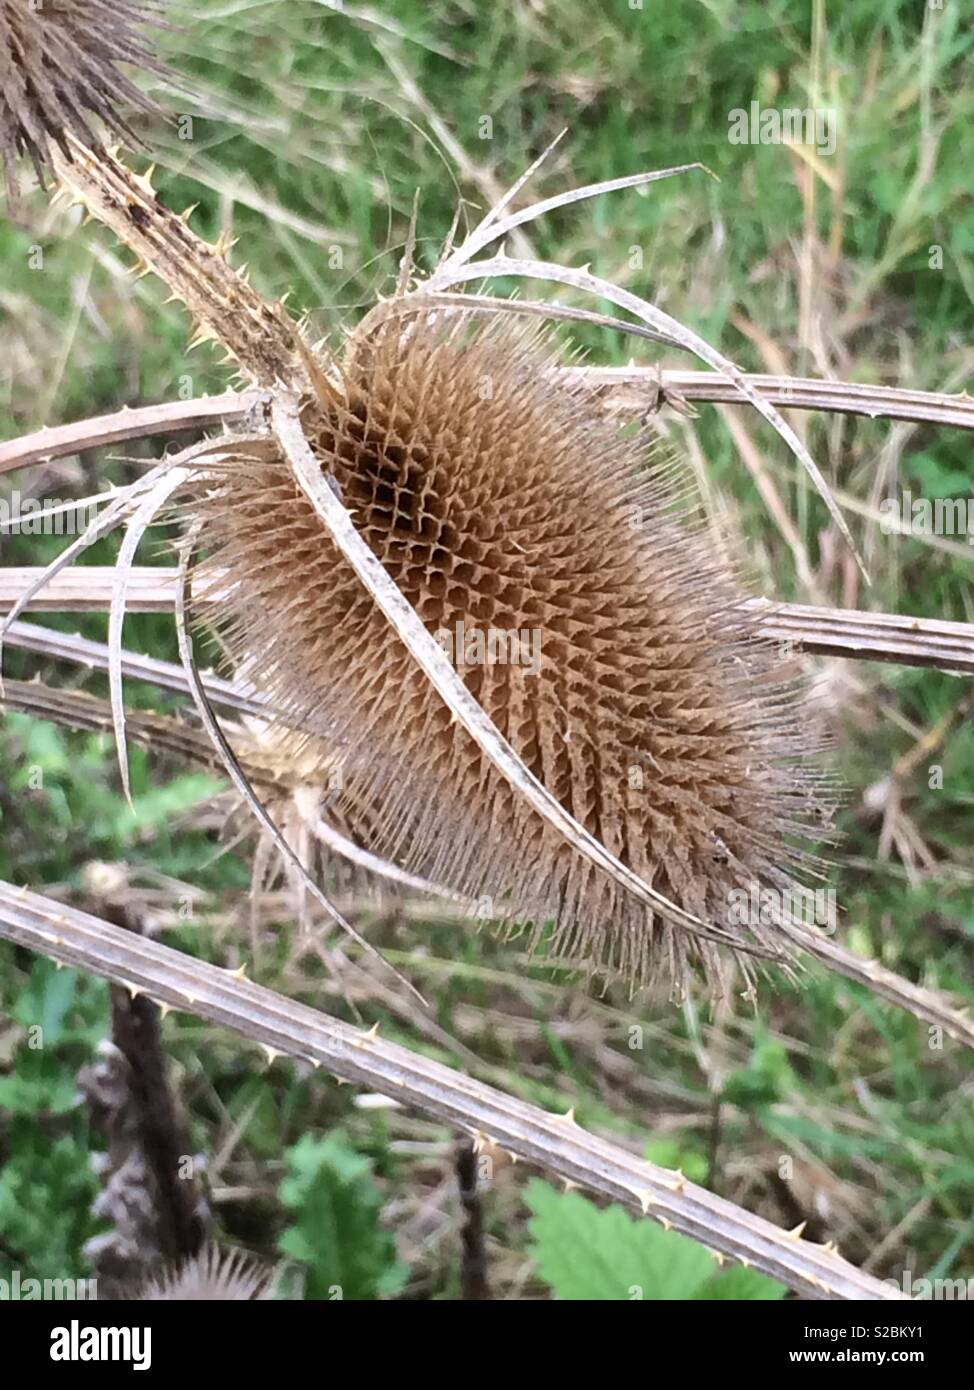 Close-up of a teasel head Stock Photo